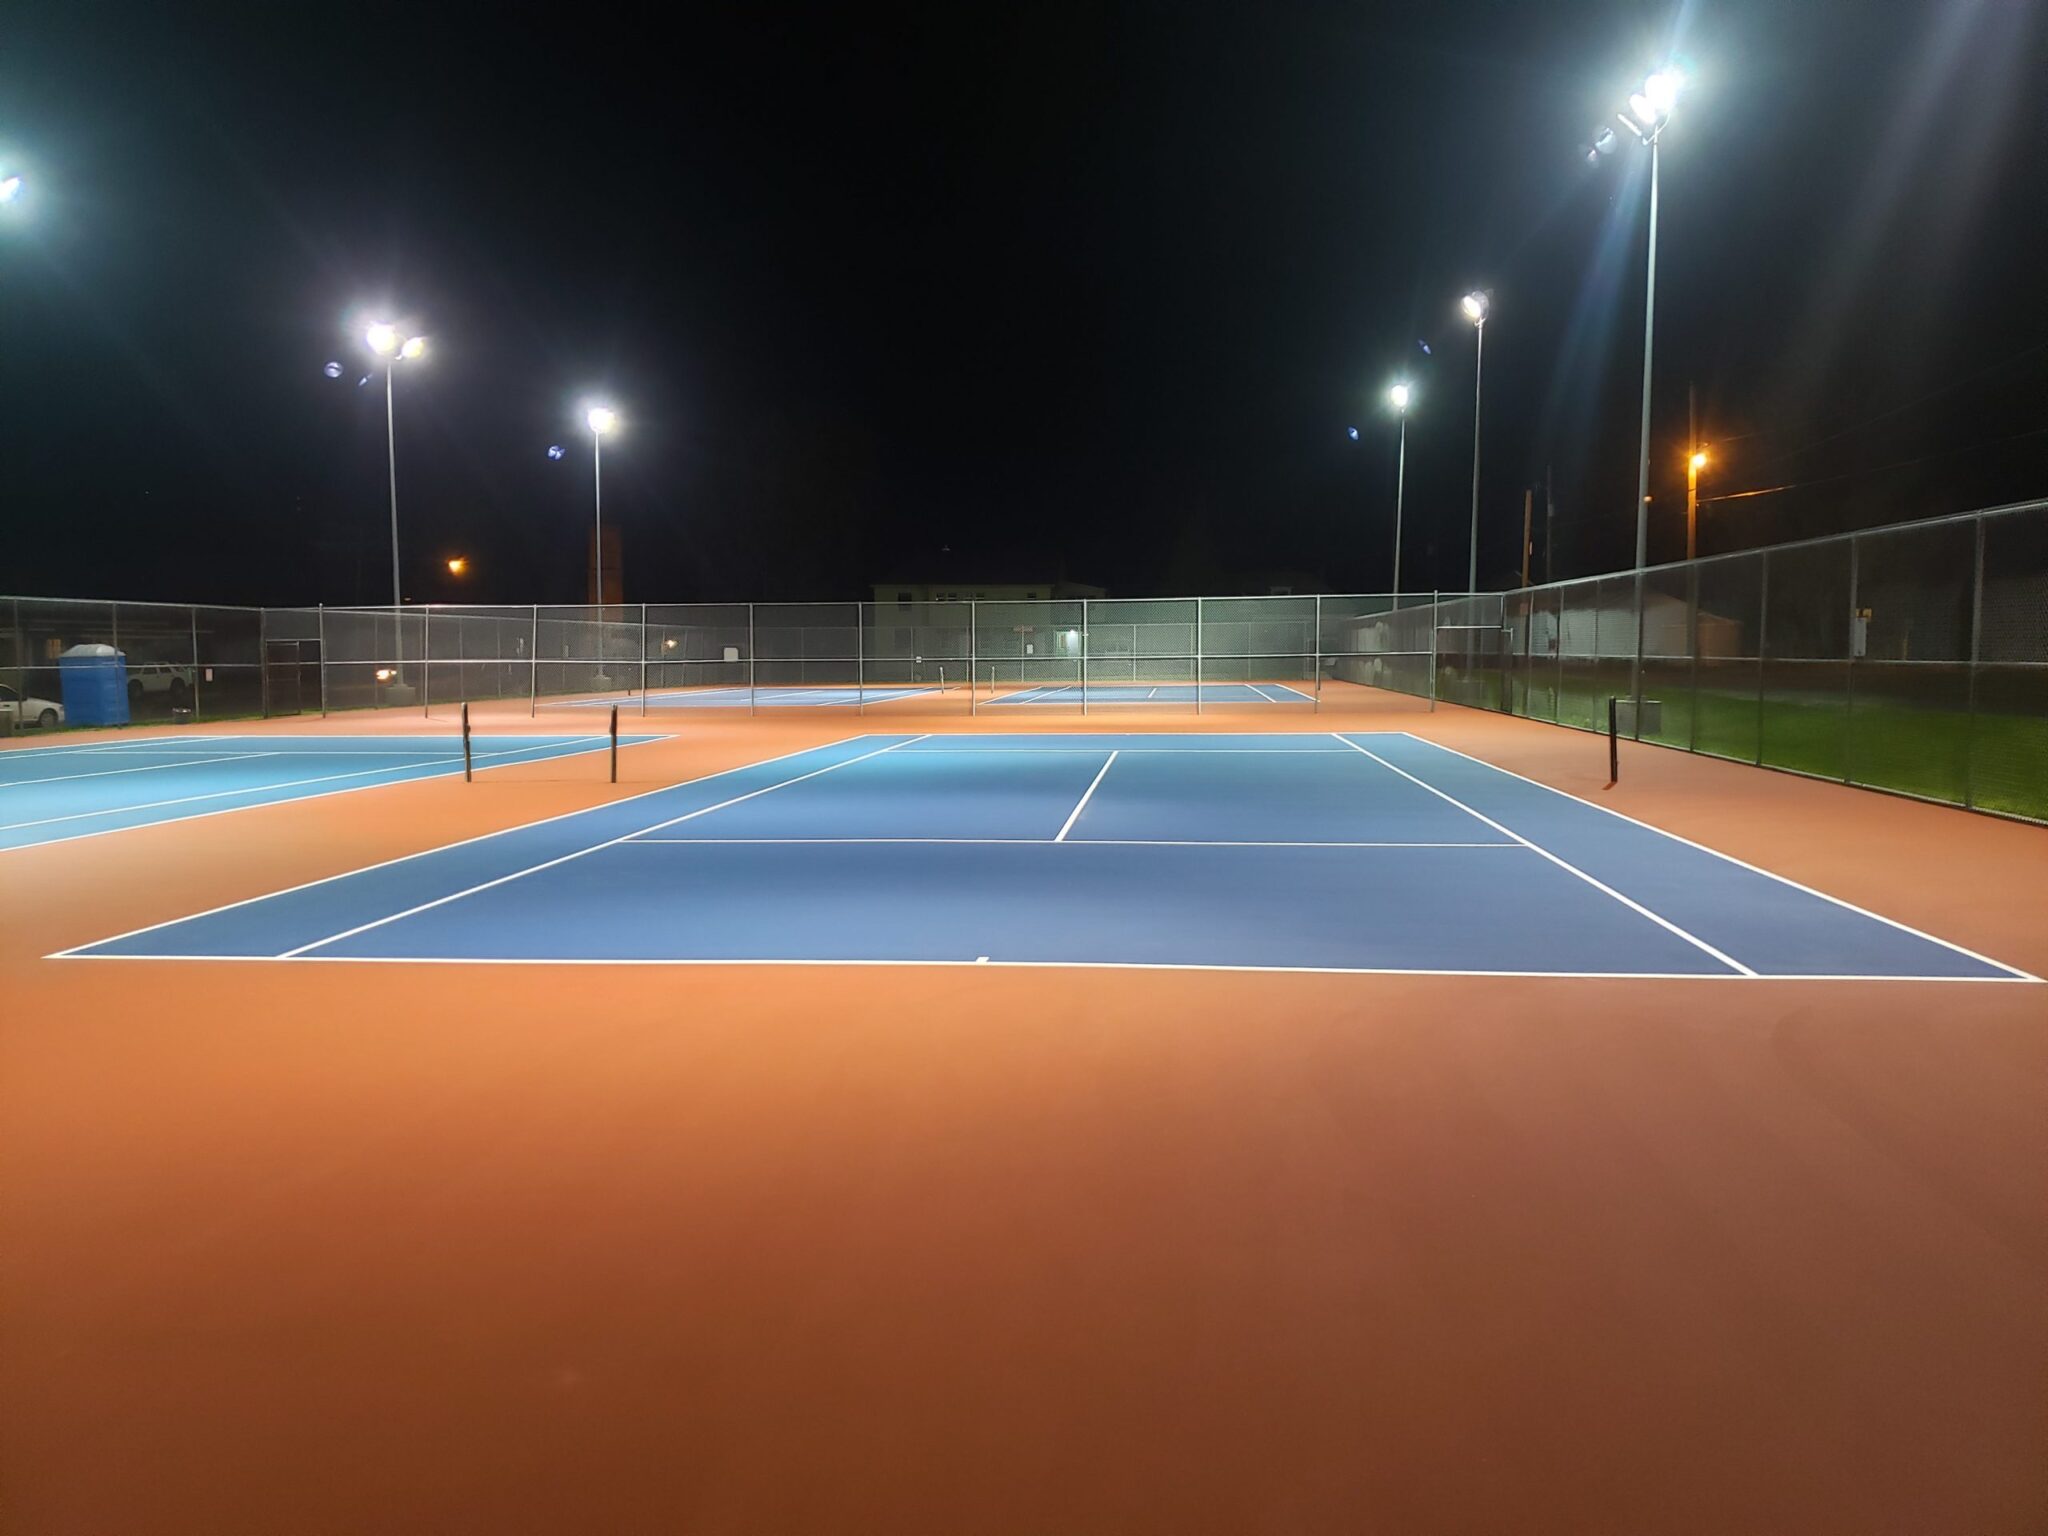 A new tennis court complex under lights with fencing that includes orange, blue, and white colors.